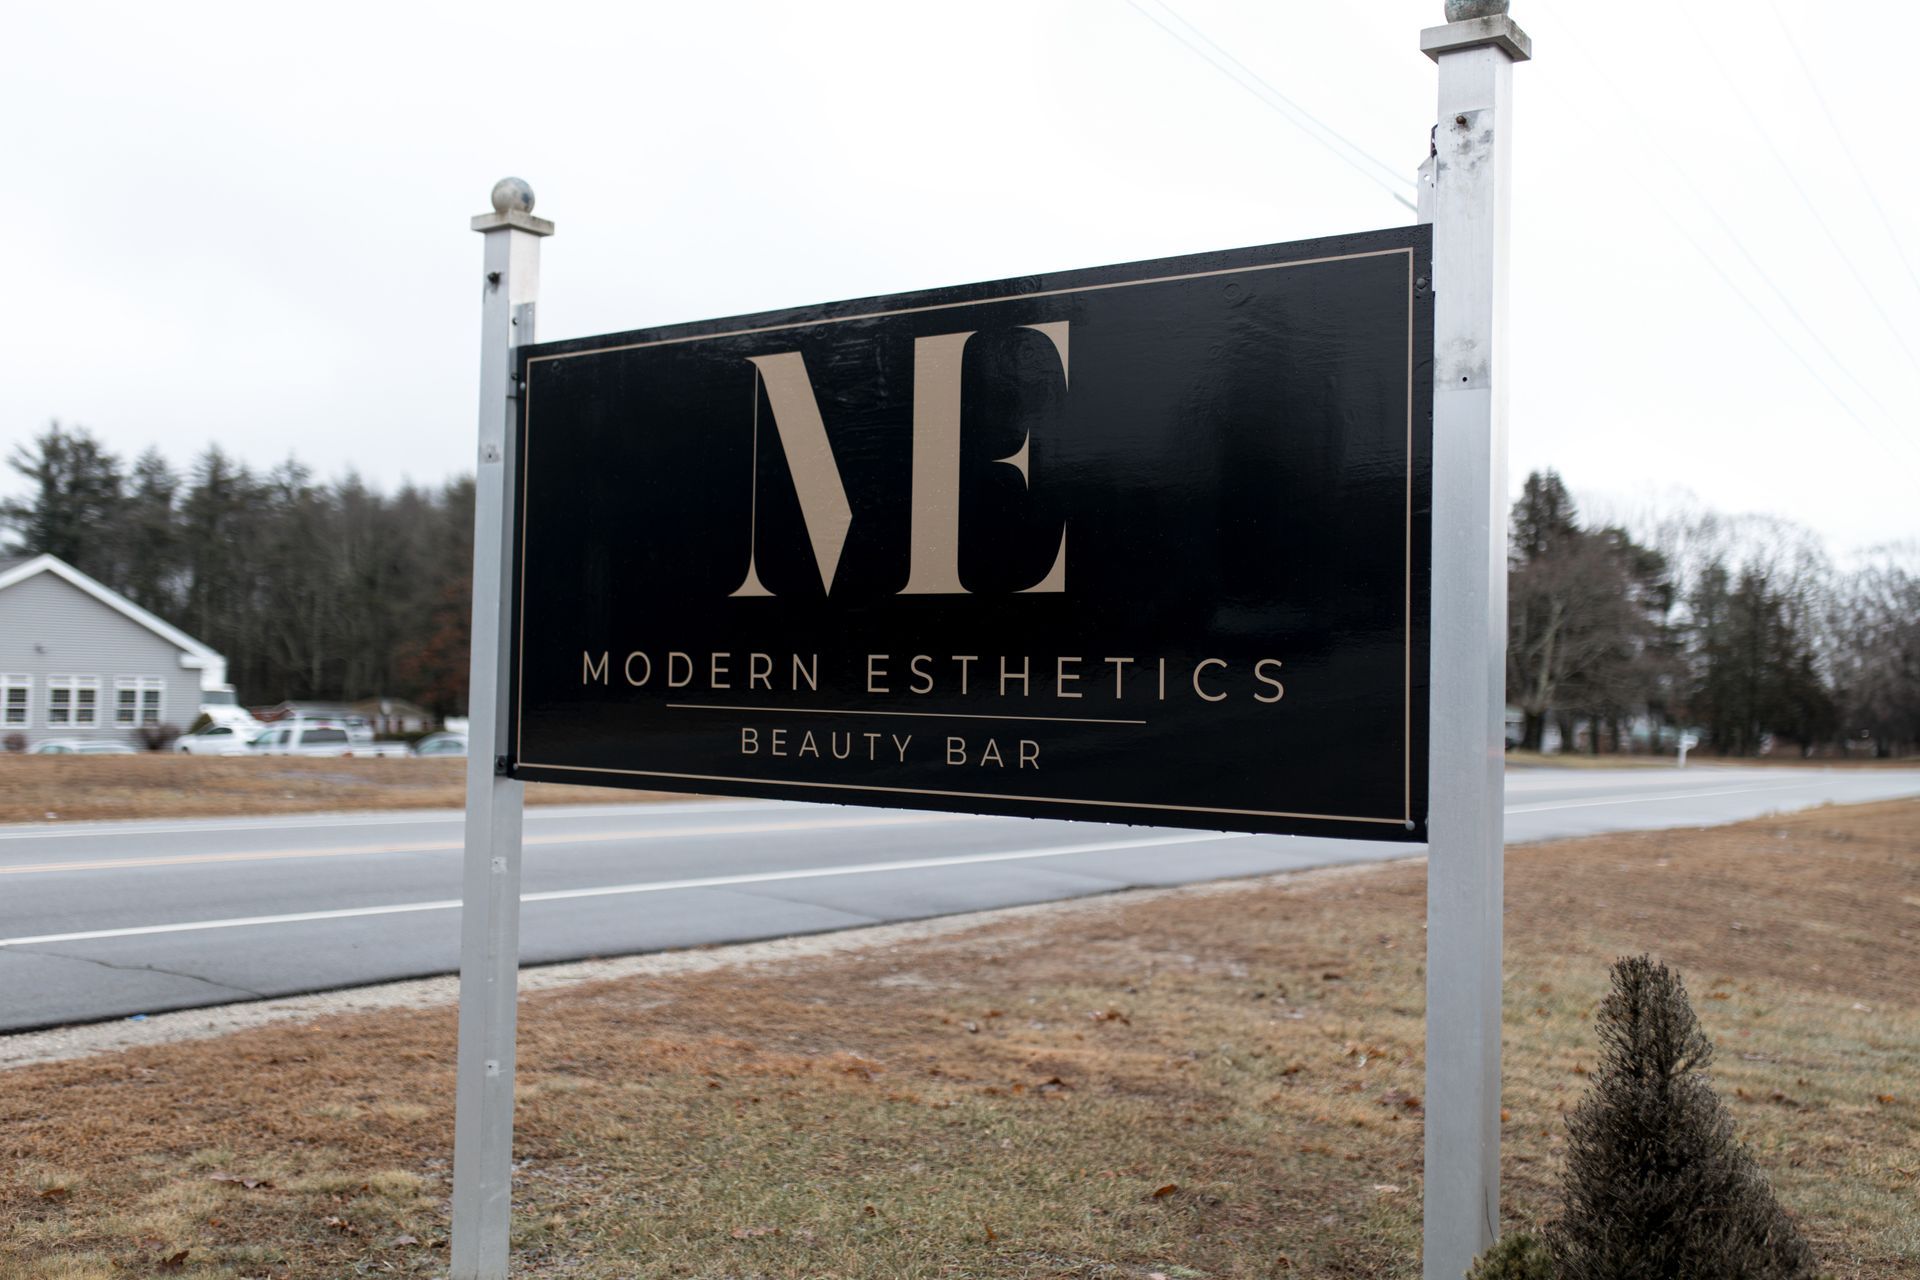 A sign for modern esthetics is hanging on a pole in front of a road.